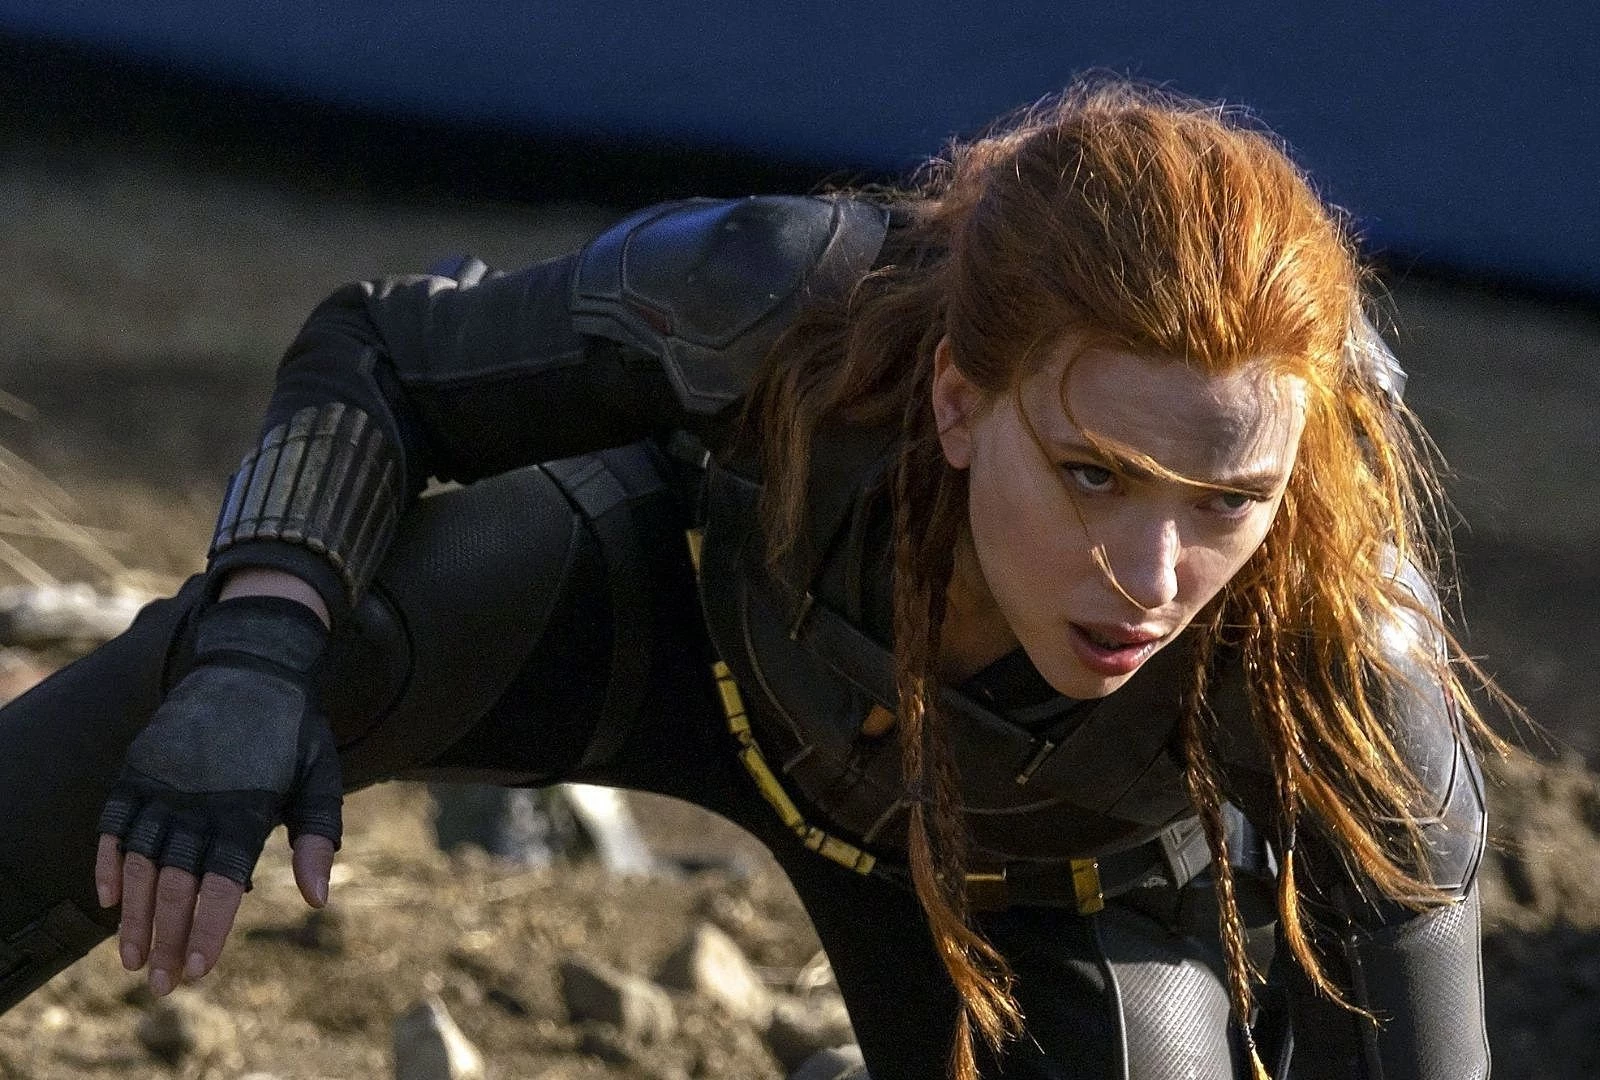 Scarlett Johansson Movies & TV Shows List (2023): From Lost in